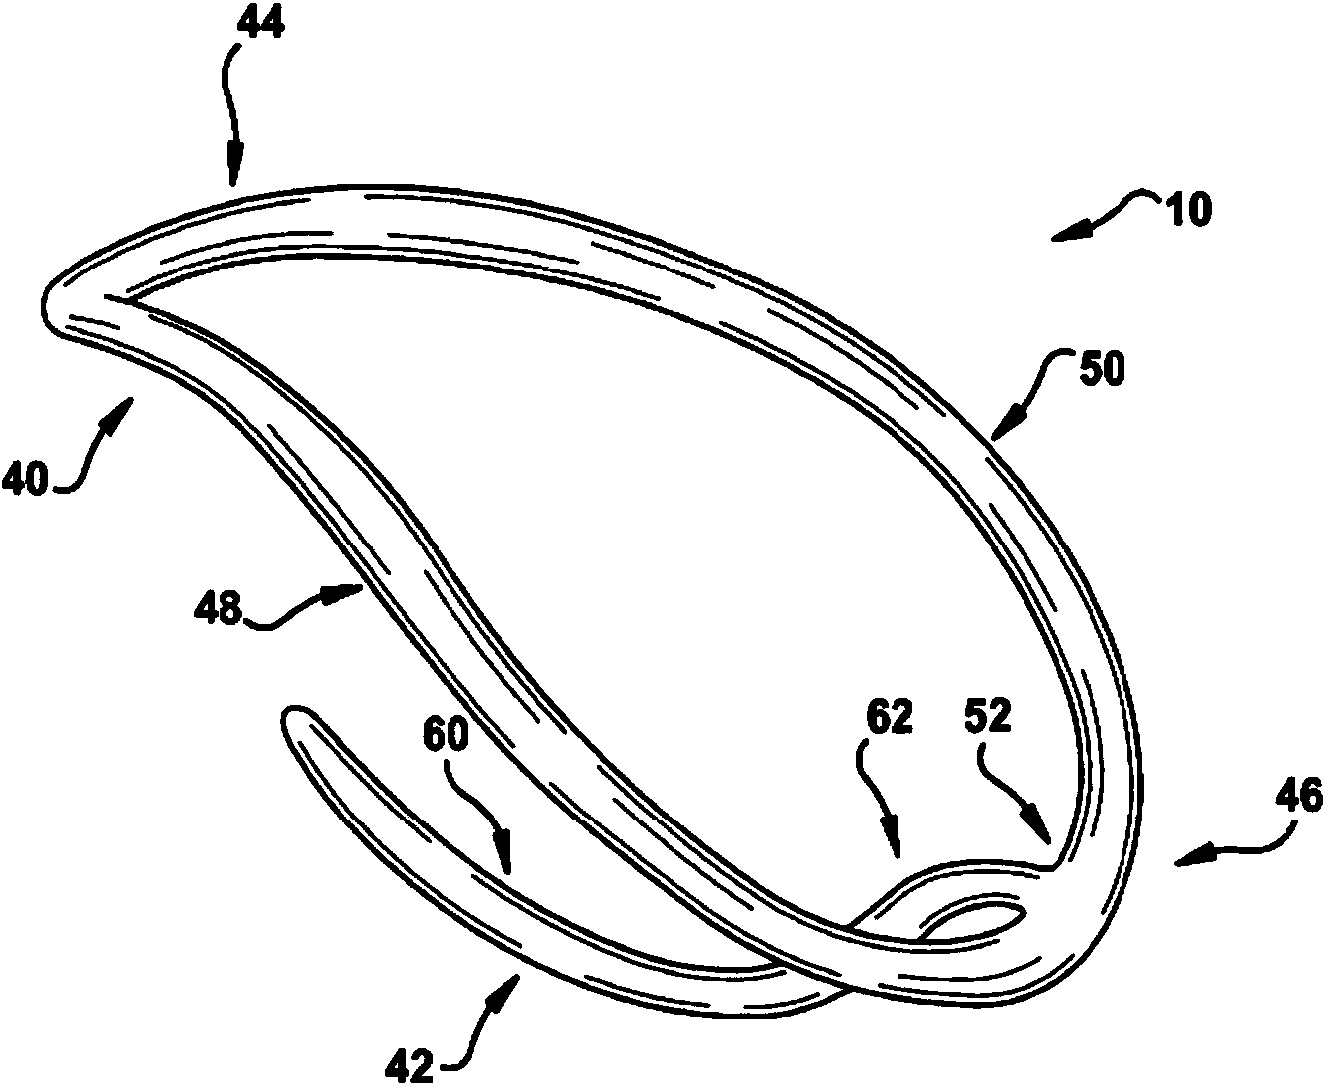 Apparatus and method for treating a regurgitant heart valve